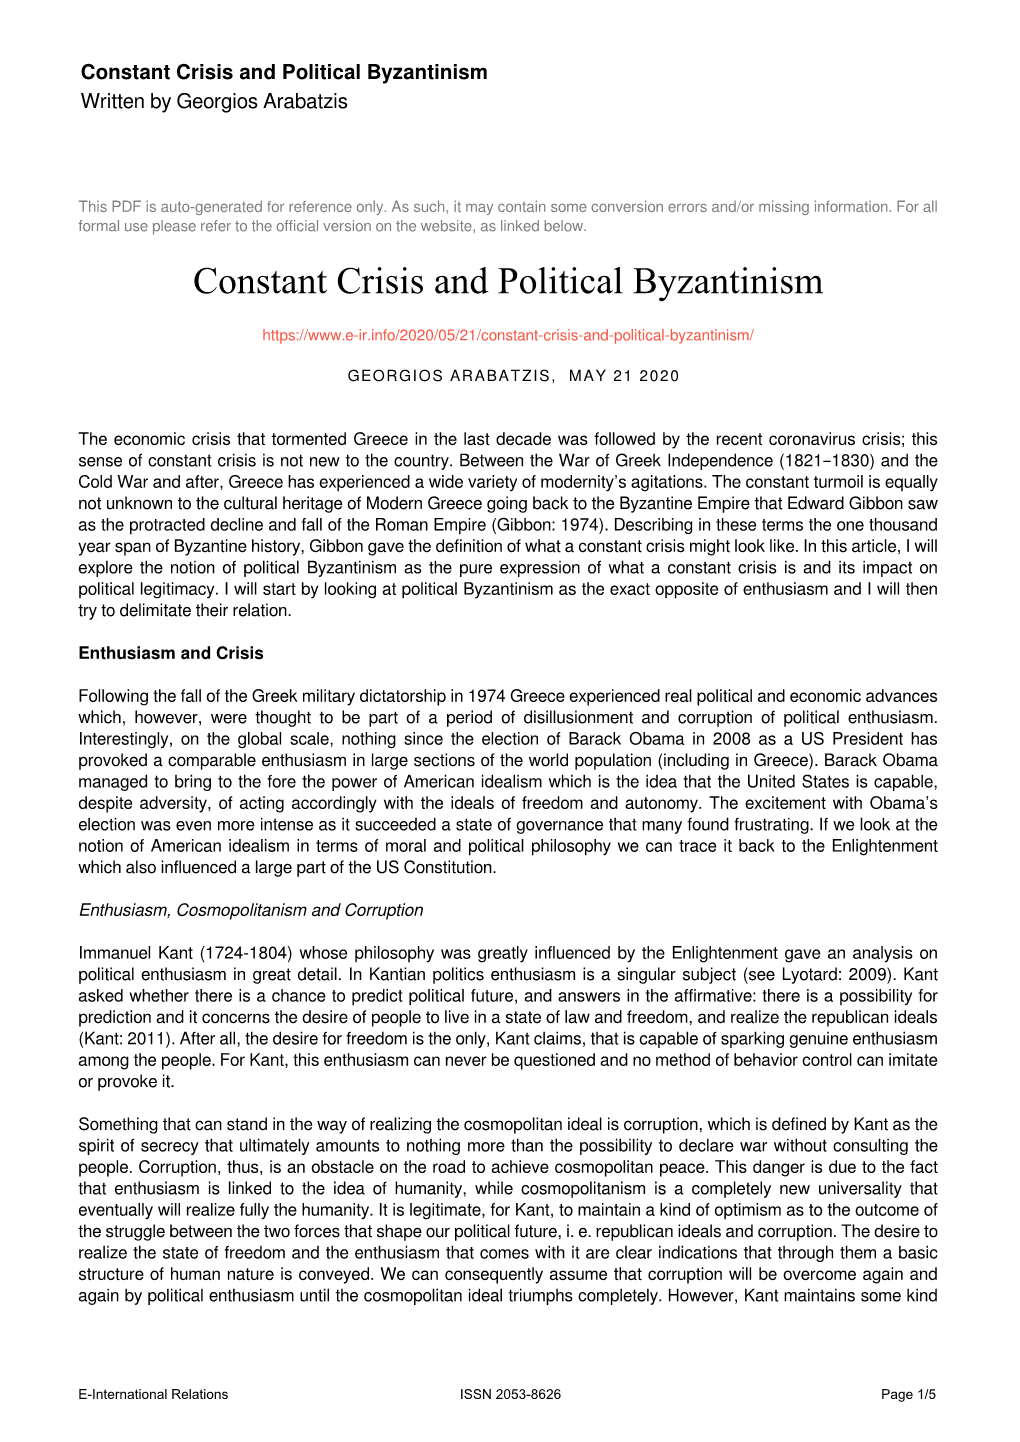 Constant Crisis and Political Byzantinism Written by Georgios Arabatzis